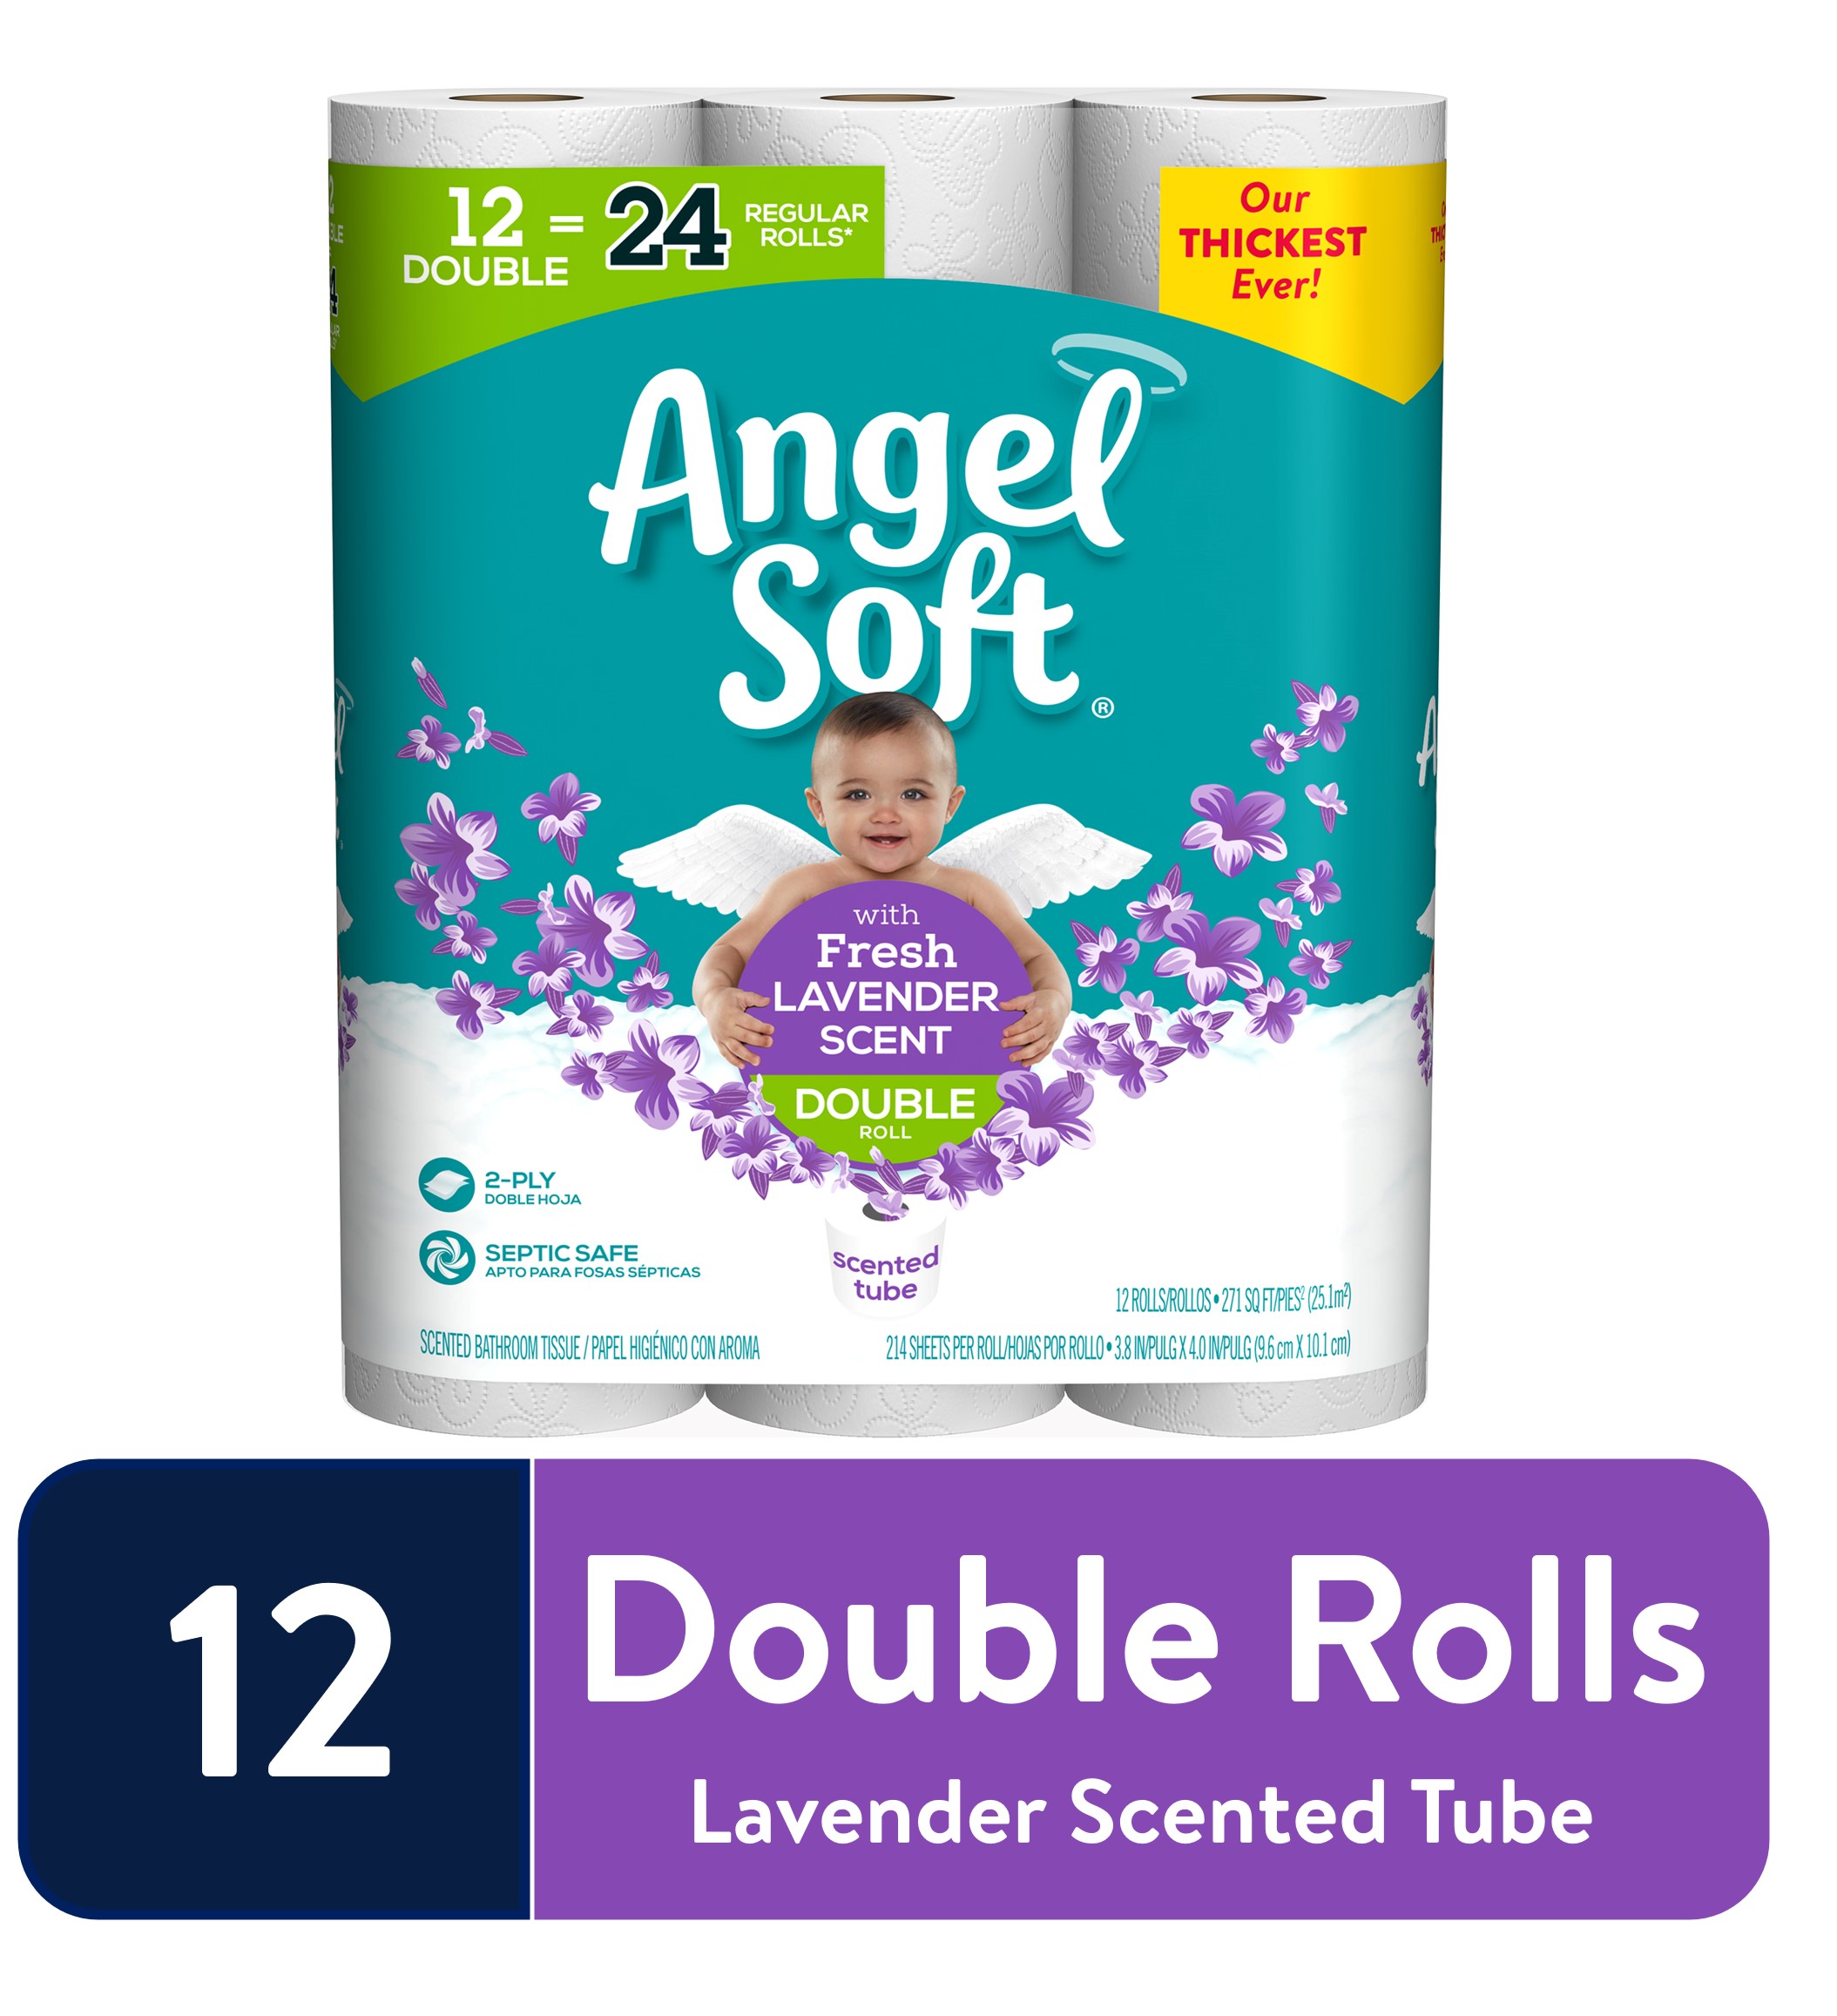 Angel Soft Toilet Paper with Fresh Lavender Scent, 12 Double Rolls - image 1 of 8